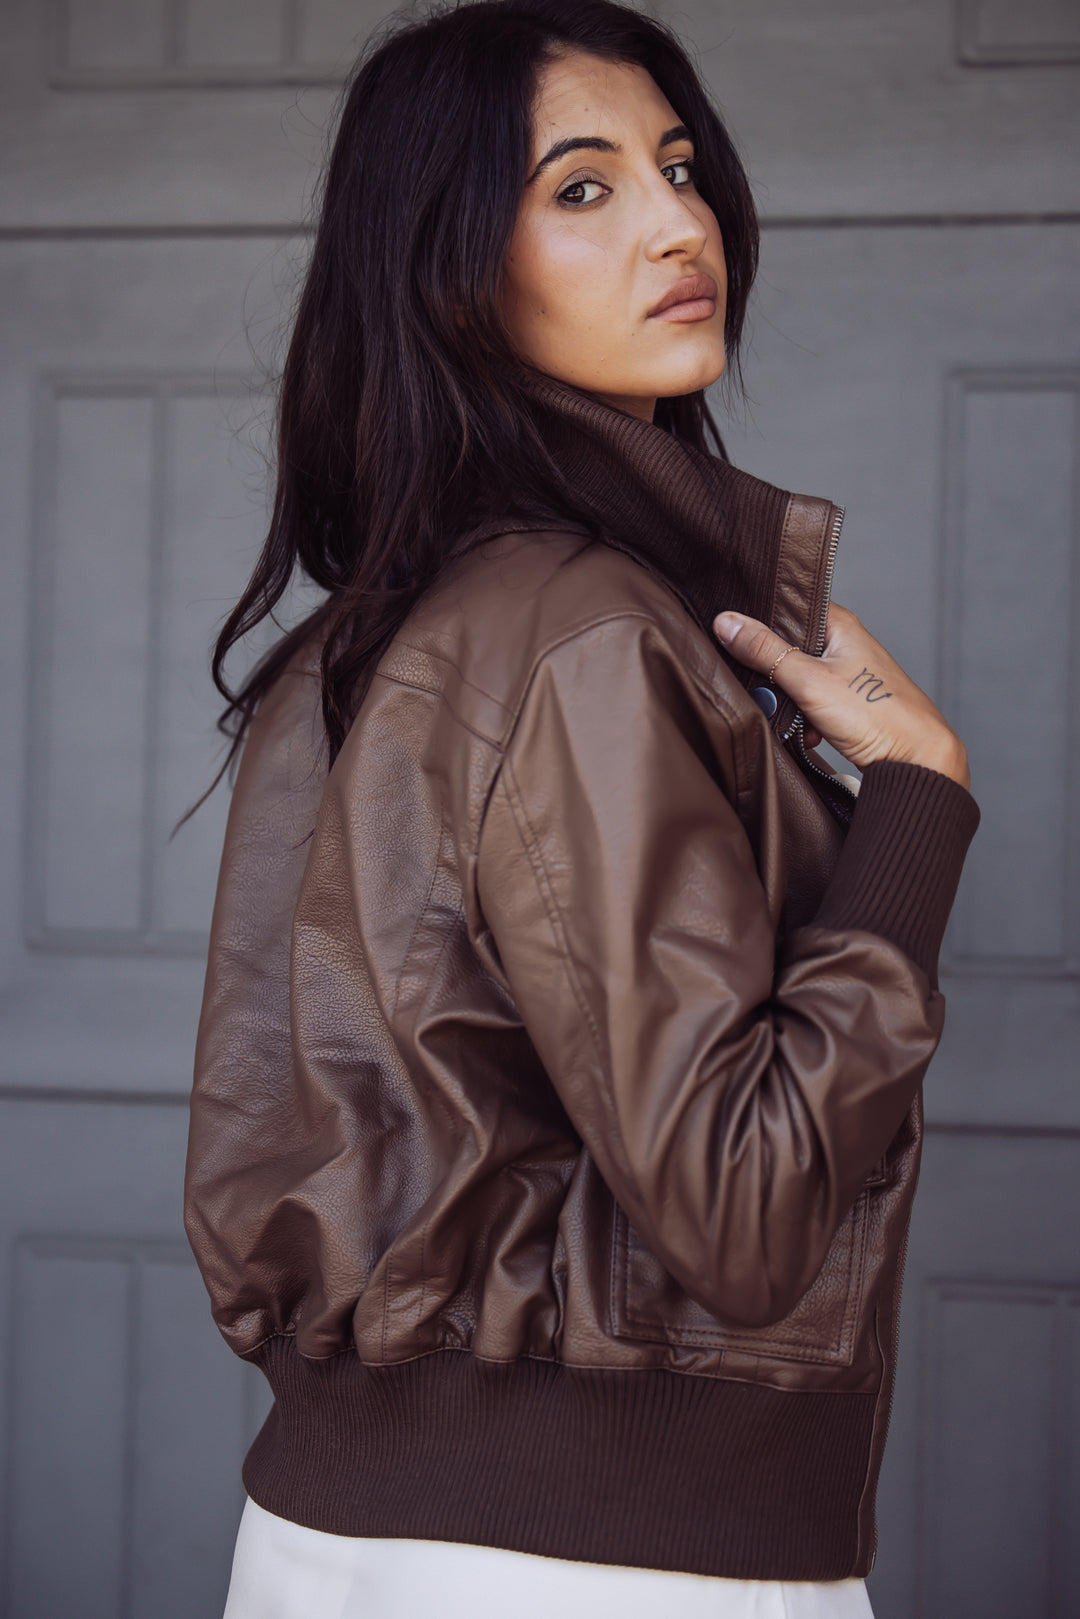 Steve Madden Caprice Faux leather Bomber Jacket- Brown